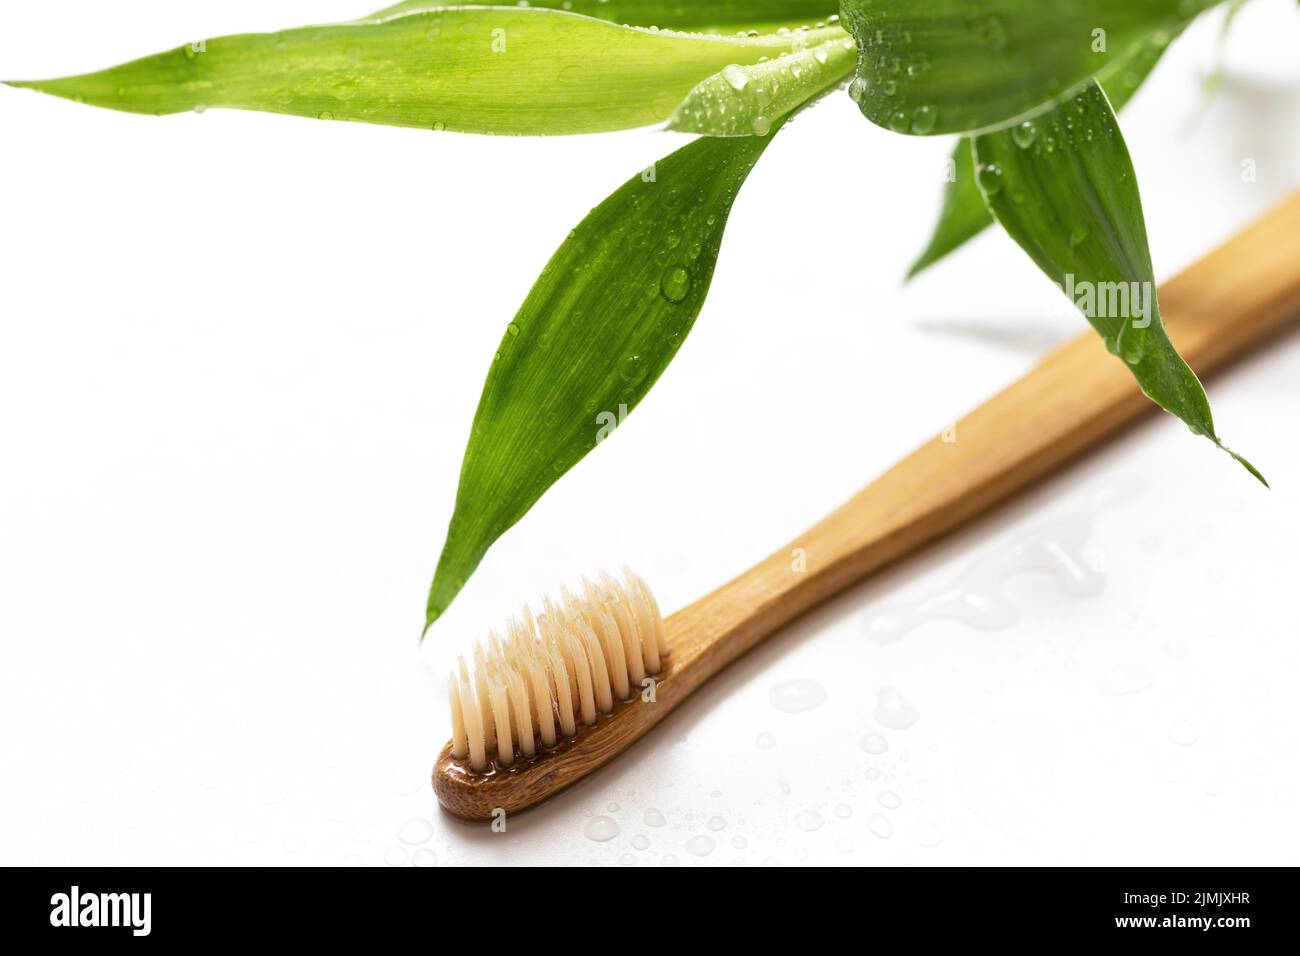 Eco friendly toothbrush and bamboo plant on white Stock Photo